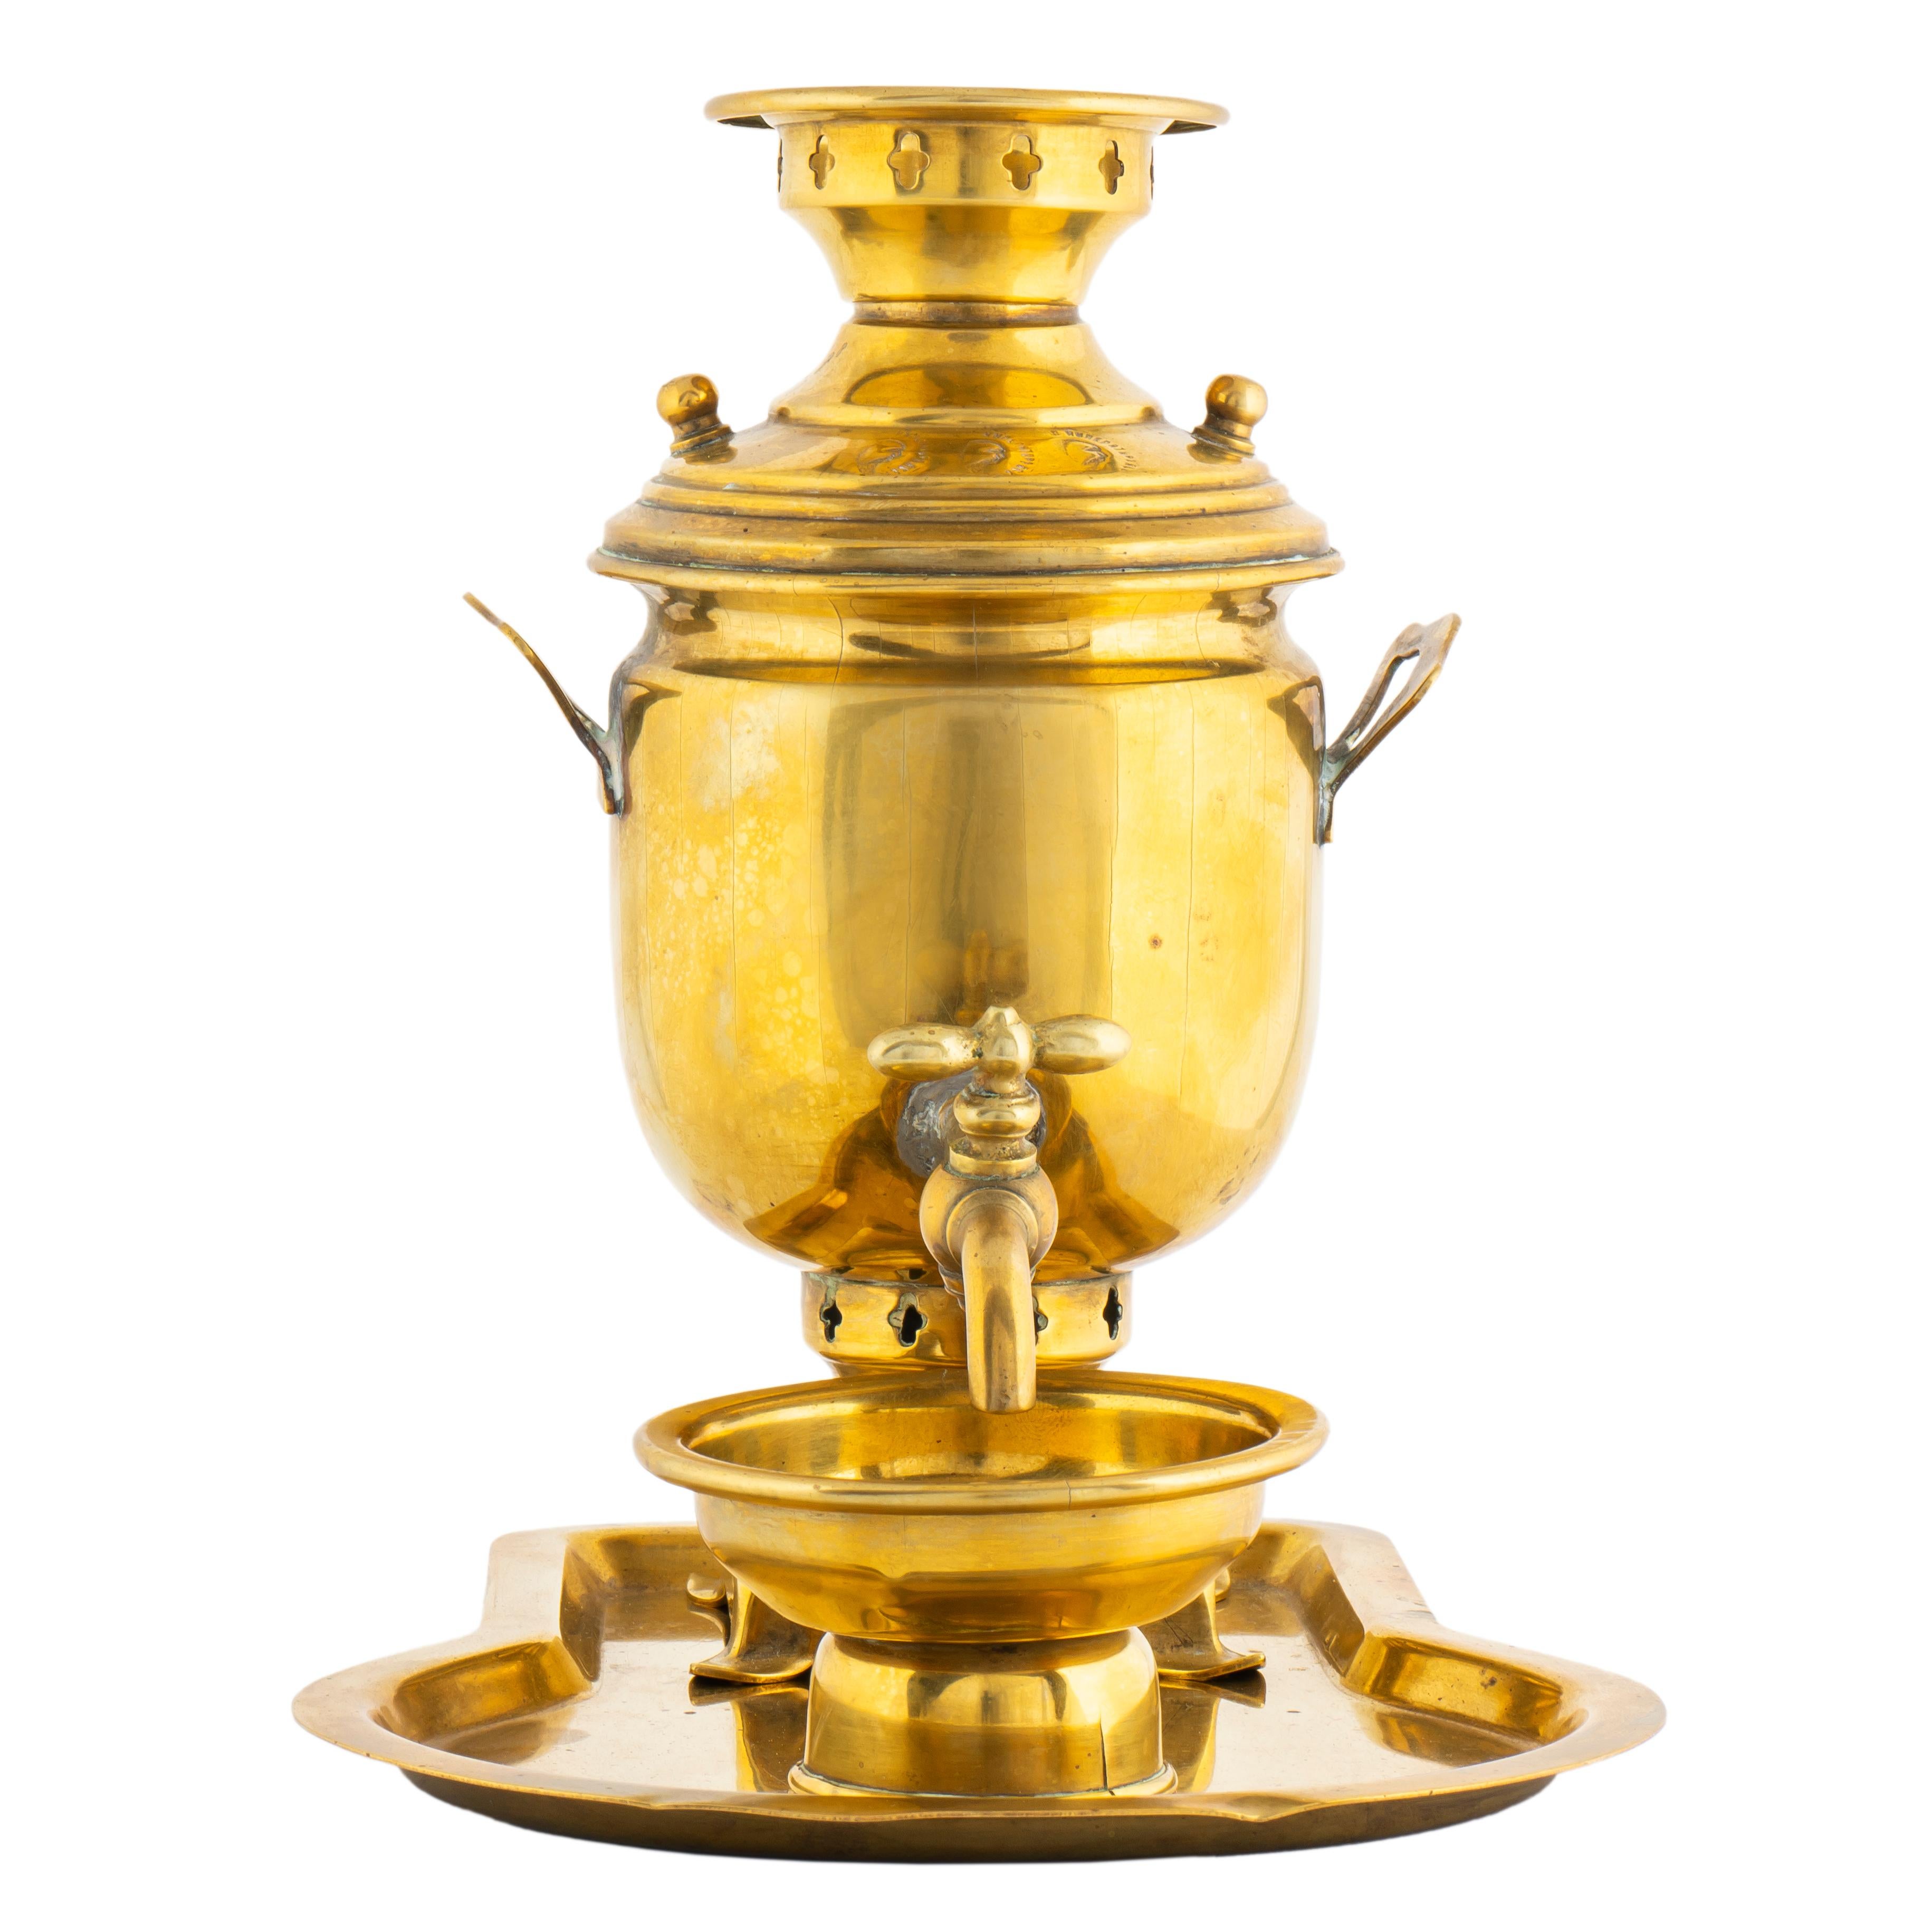 Of typical form in the Russian imperial style, a classic samovar set tooled in brass comprising a miniature brass samovar, drip bowl and tray. The samovar cylindrical with flared handles on a pedestal base, the front of lid stamped with three